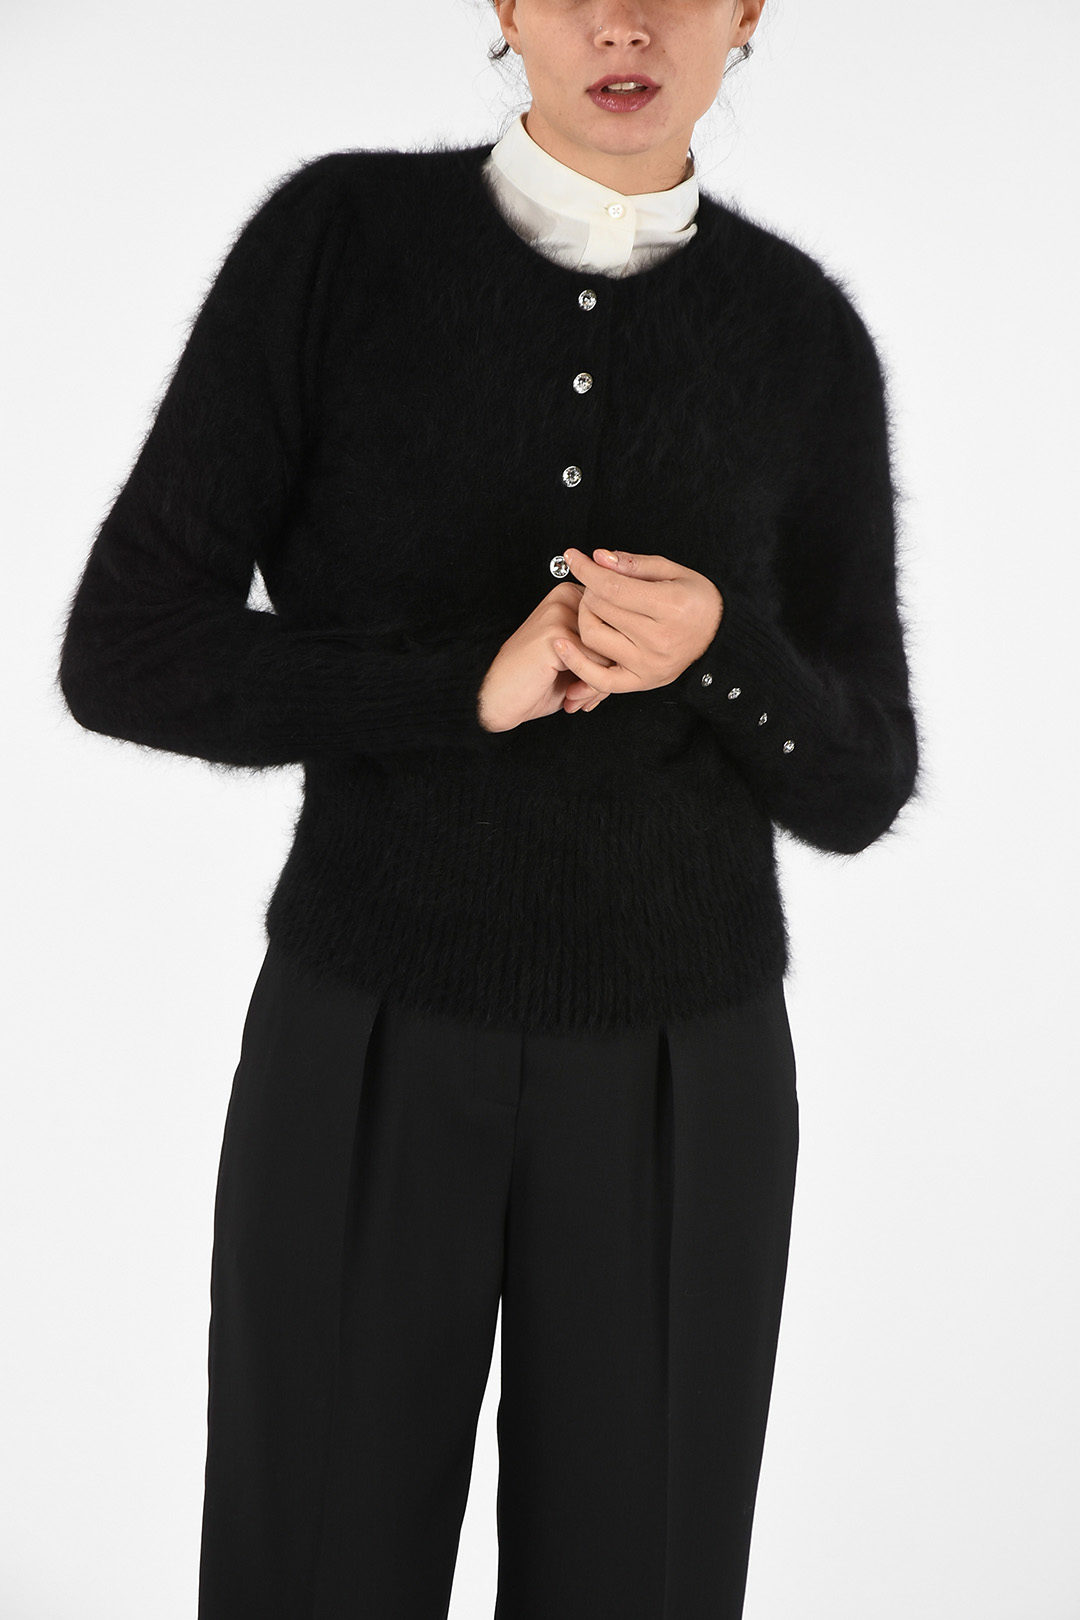 Tom Ford Rabbit Hair Sweater With Jewel Buttons women - Glamood Outlet